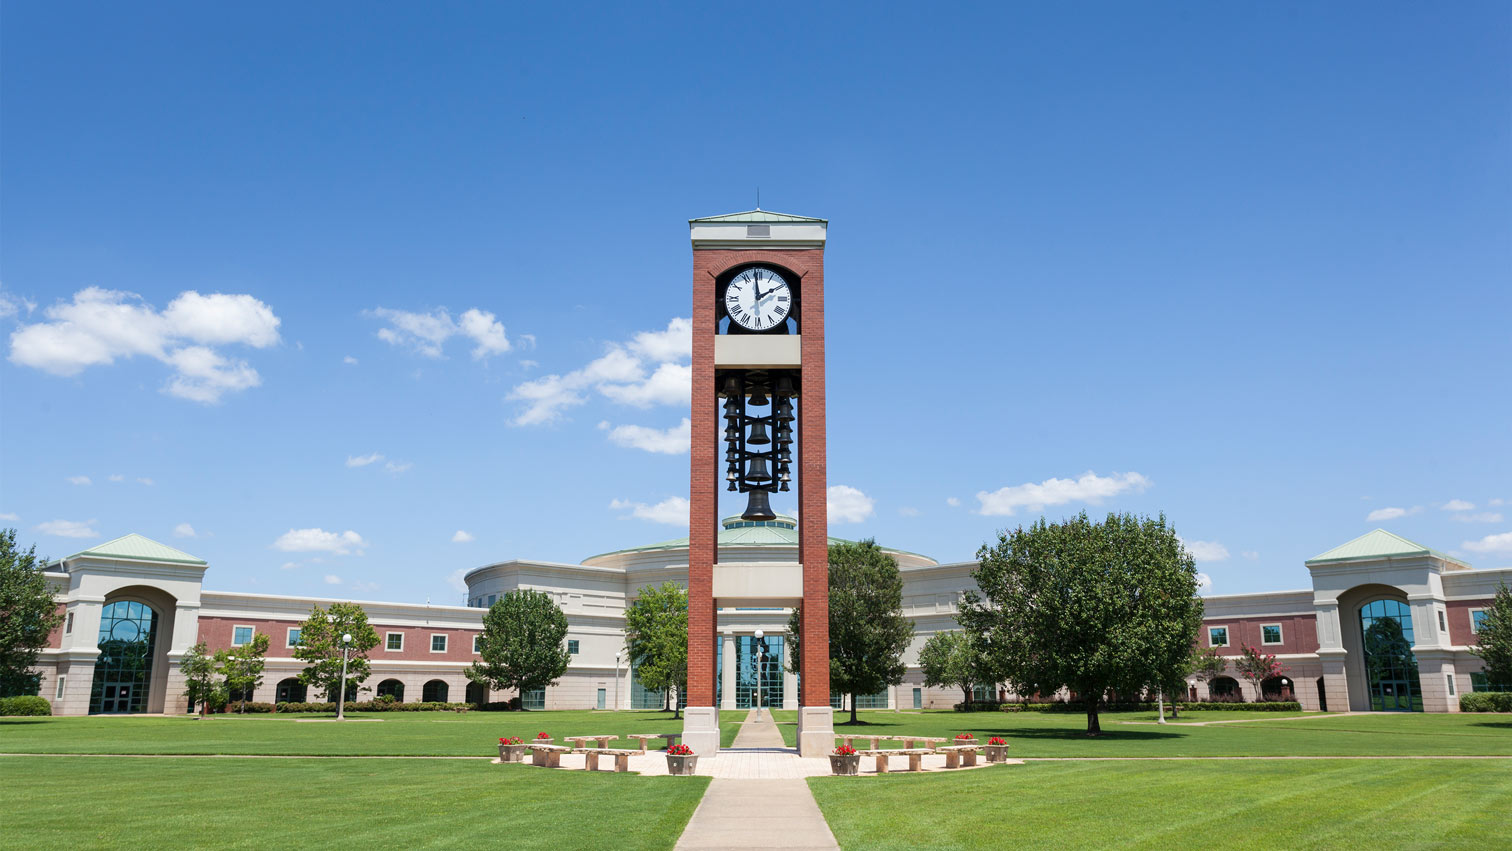 Clocktower on Shelton State campus, one of 24 community colleges in Alabama.